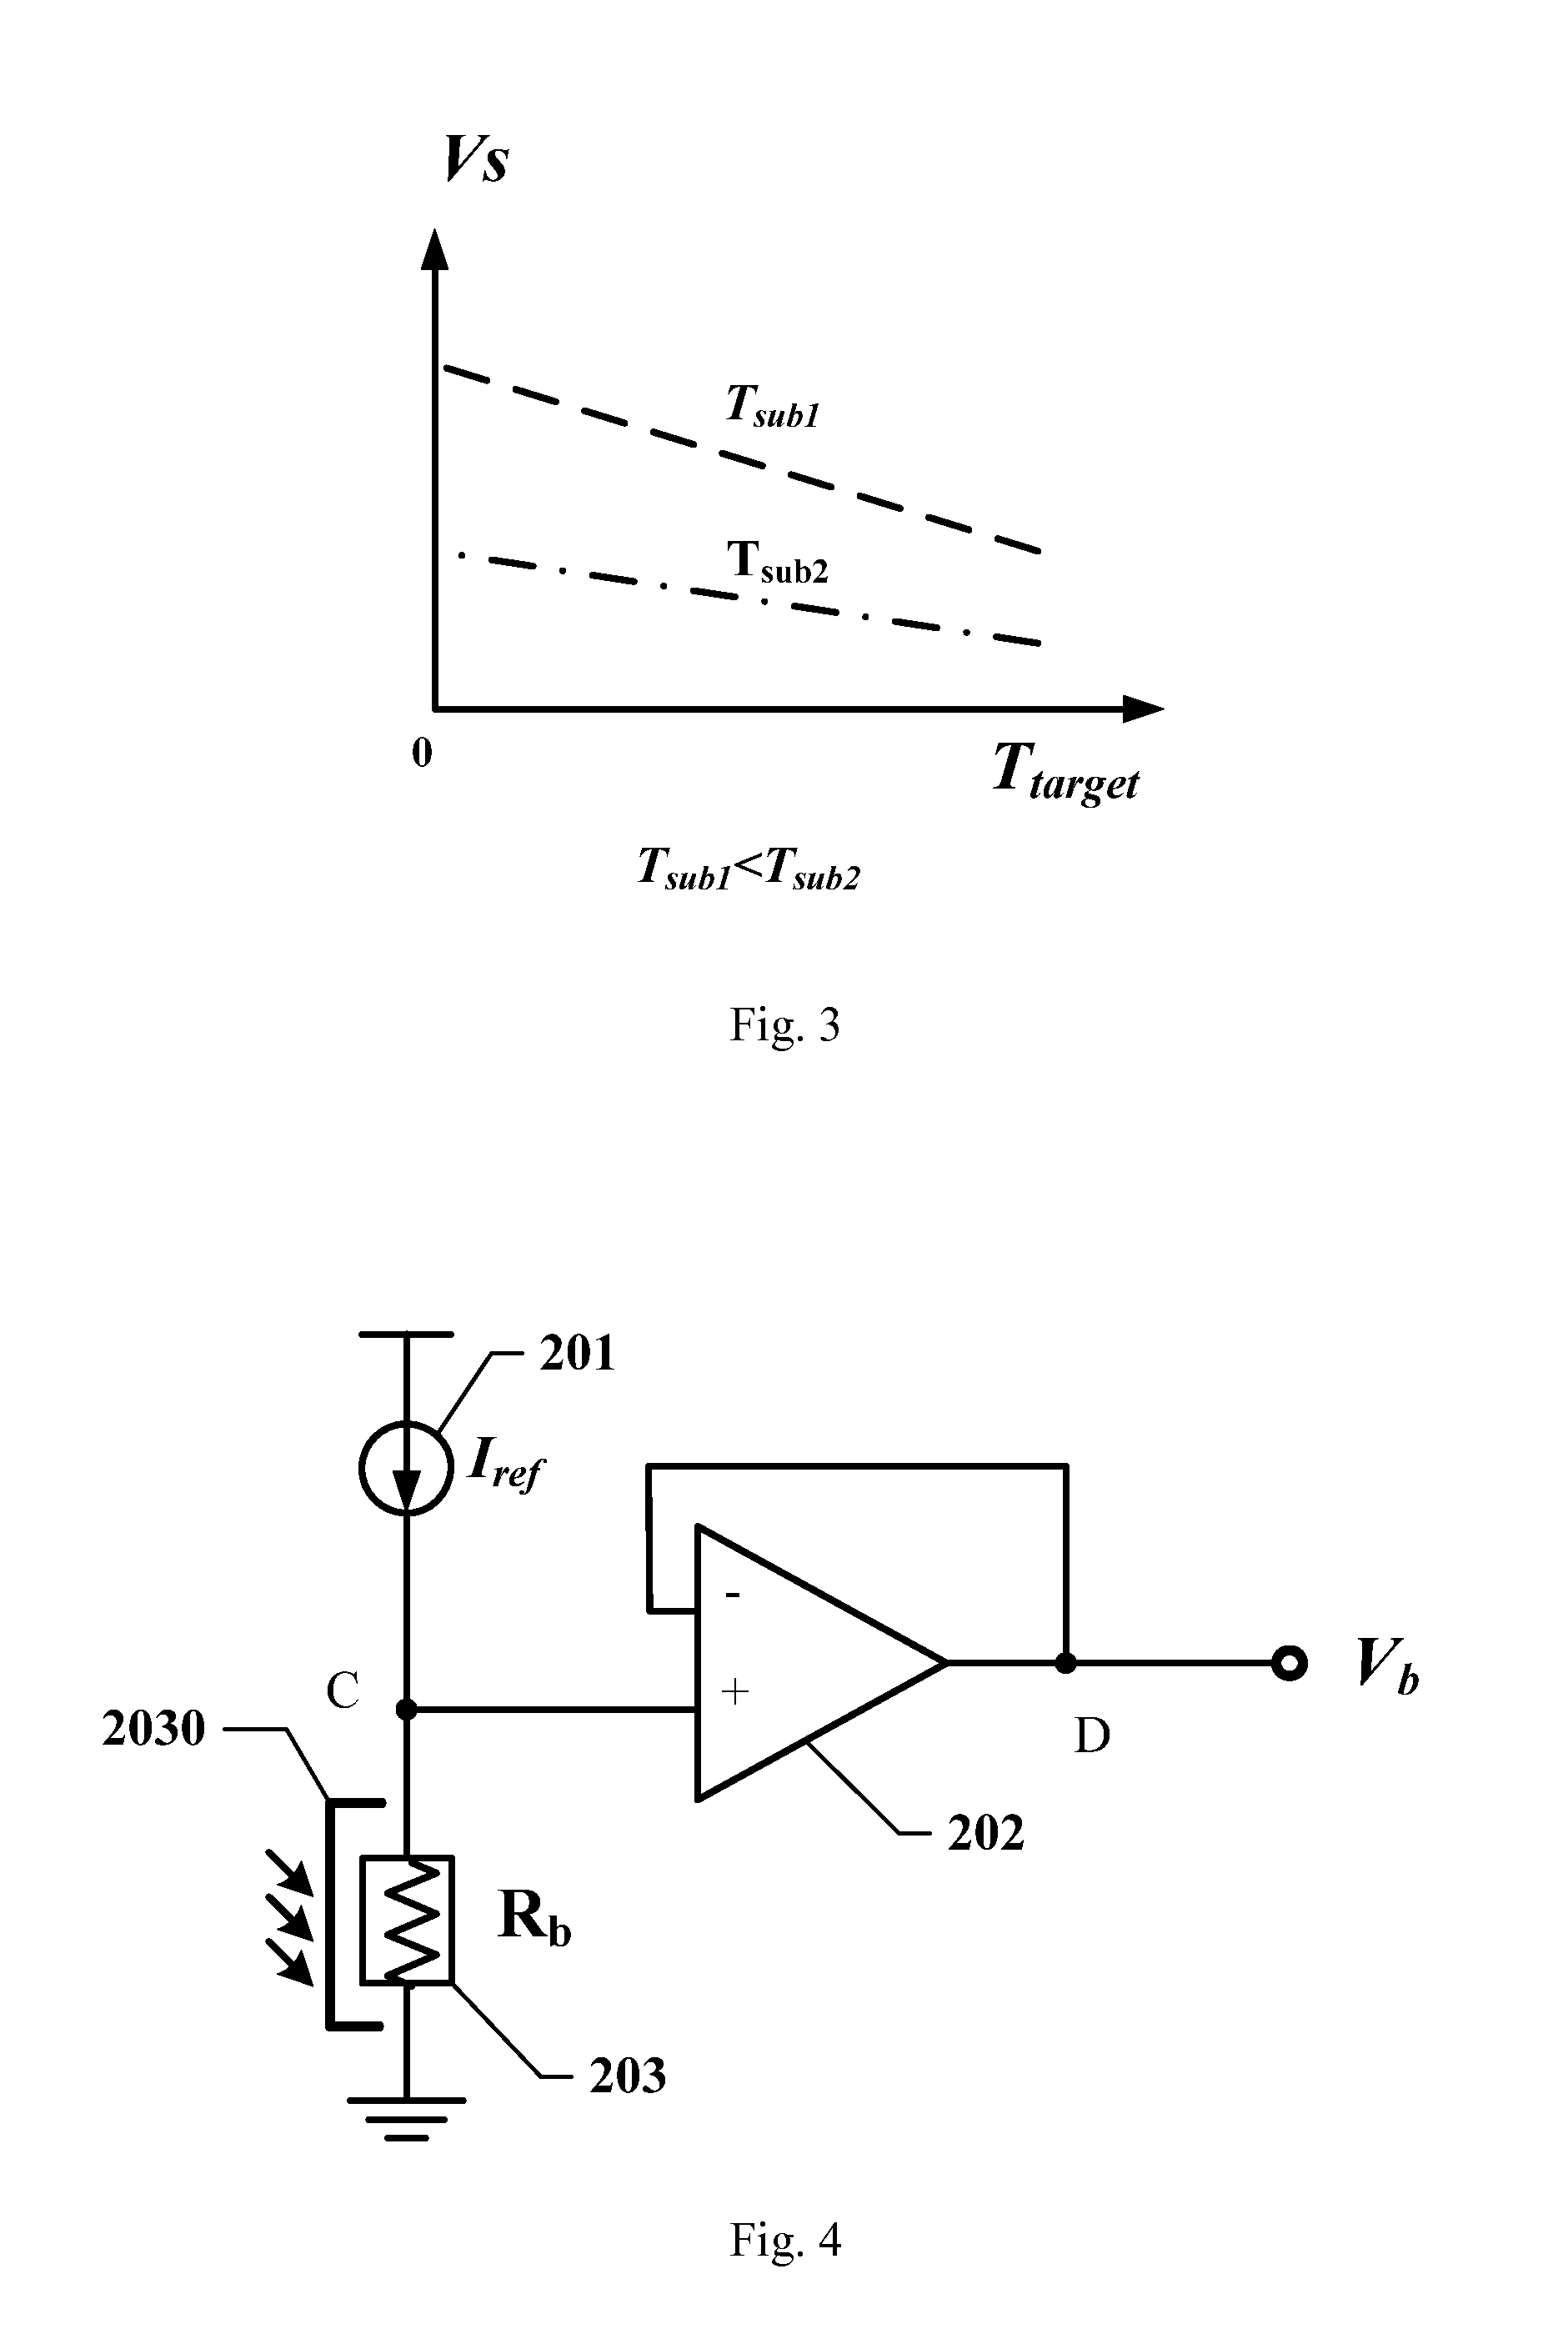 Readout circuit for uncooled infrared focal plane array